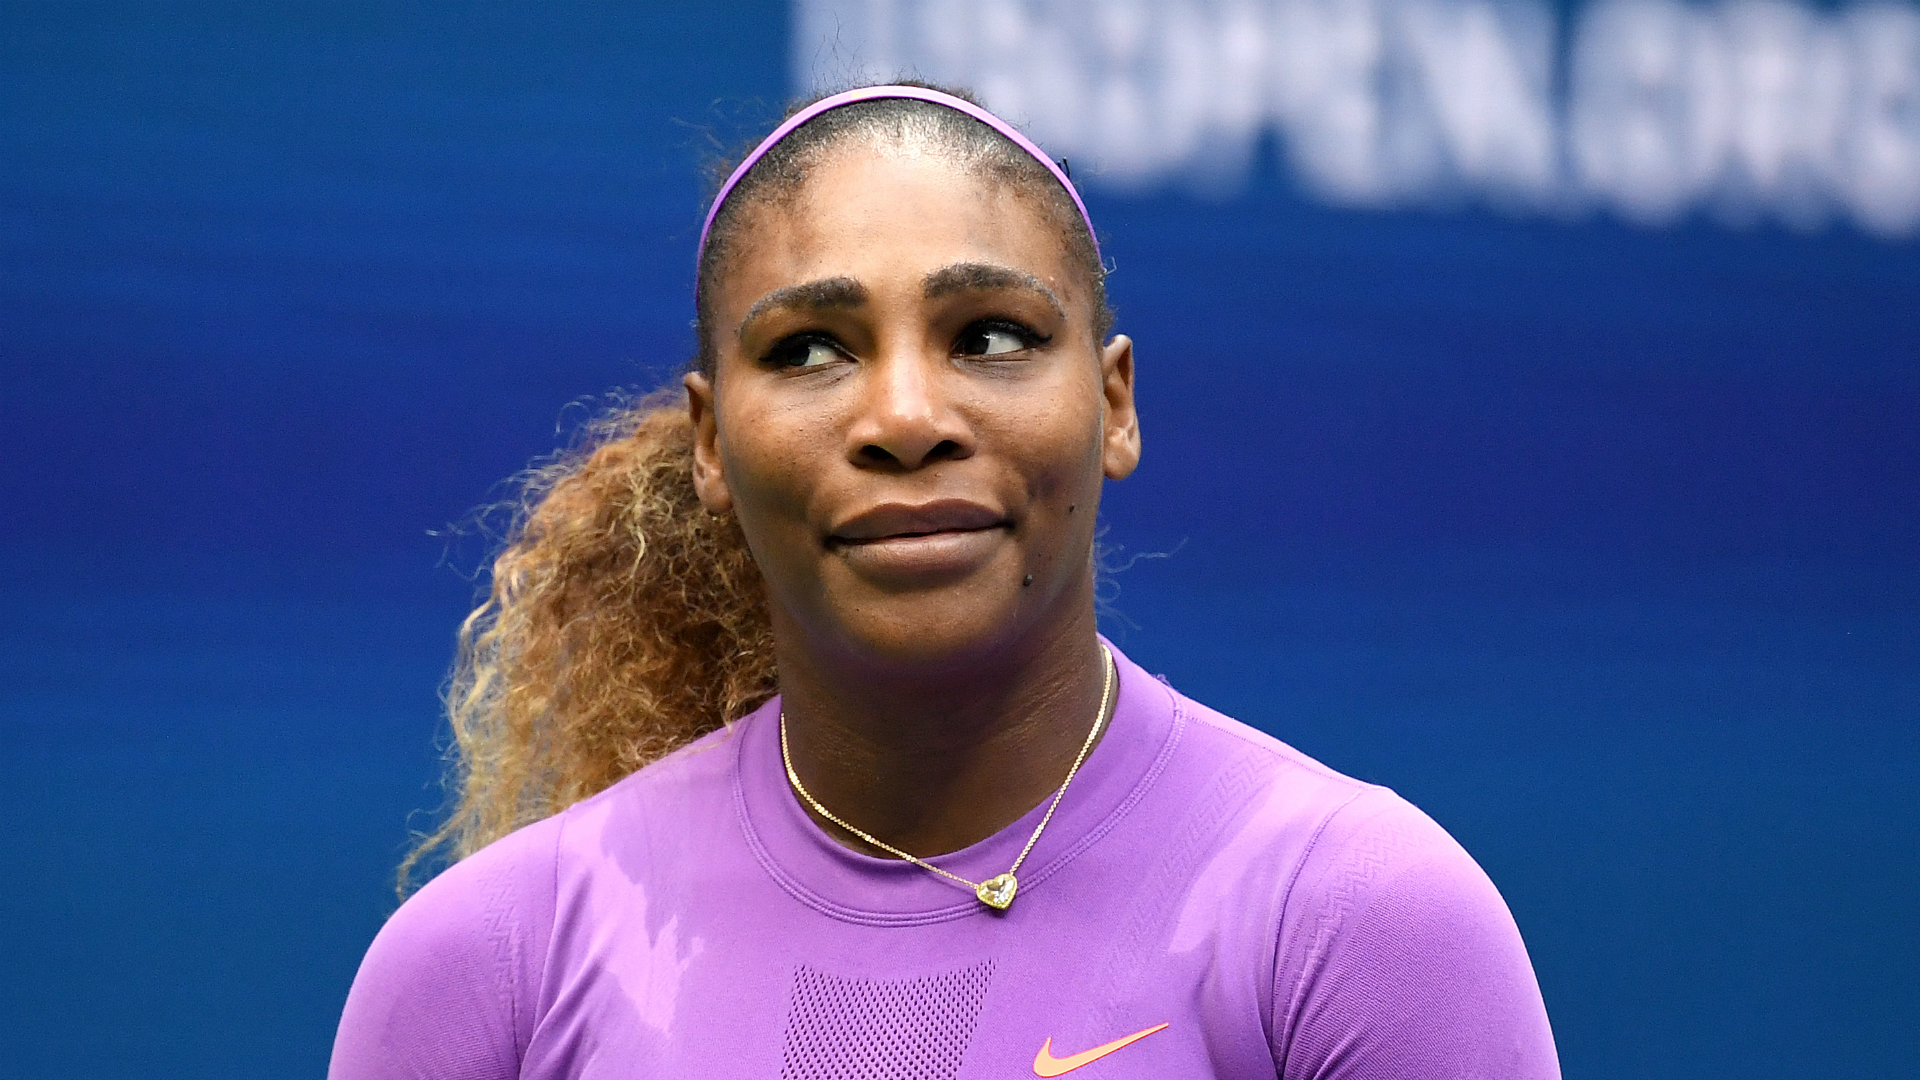 Serena Williams is agonisingly close to matching Margaret Court's grand slam record but has been stuck on 23 titles for almost three years.